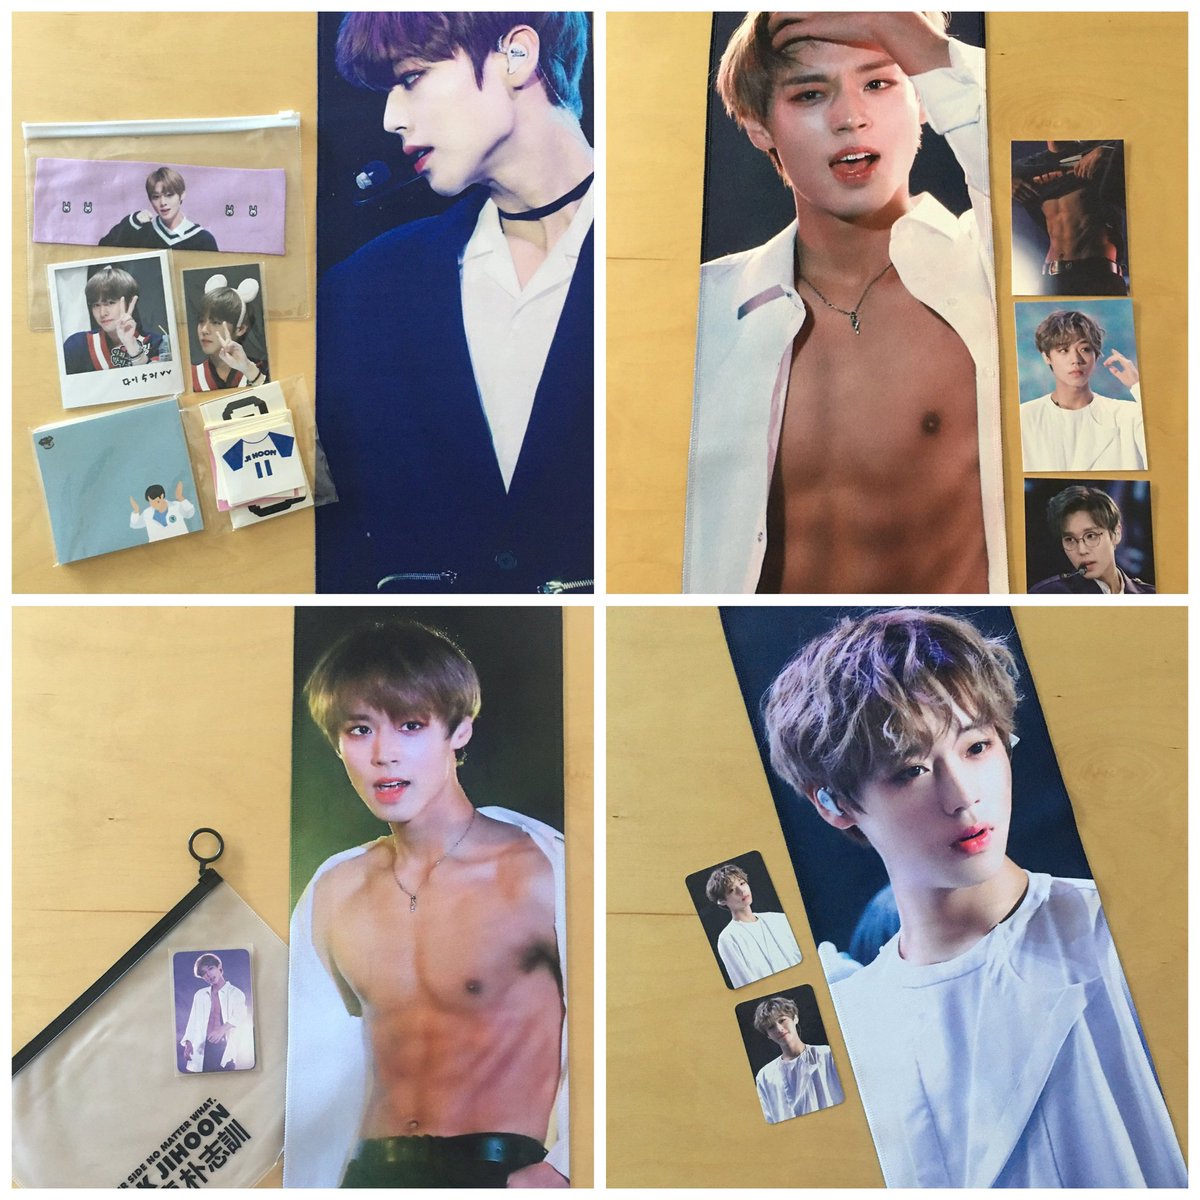 Anneyeong Porkies!PARK JIHOON CHEERING SLOGAN PHP 900 each (w/zipper bags)1 DAY PAYMENT OF 50% OR FULL. OTHER 50% TIL DOP.DOP AUG 19SHIP TO PH AUG 22ETA 15 DAYS OR DEPENDS ON THE SITN.MOP BPI & GCASH ONLY!DM TO ORDER.Kamsa!  #porKShopGO19  #wannaone